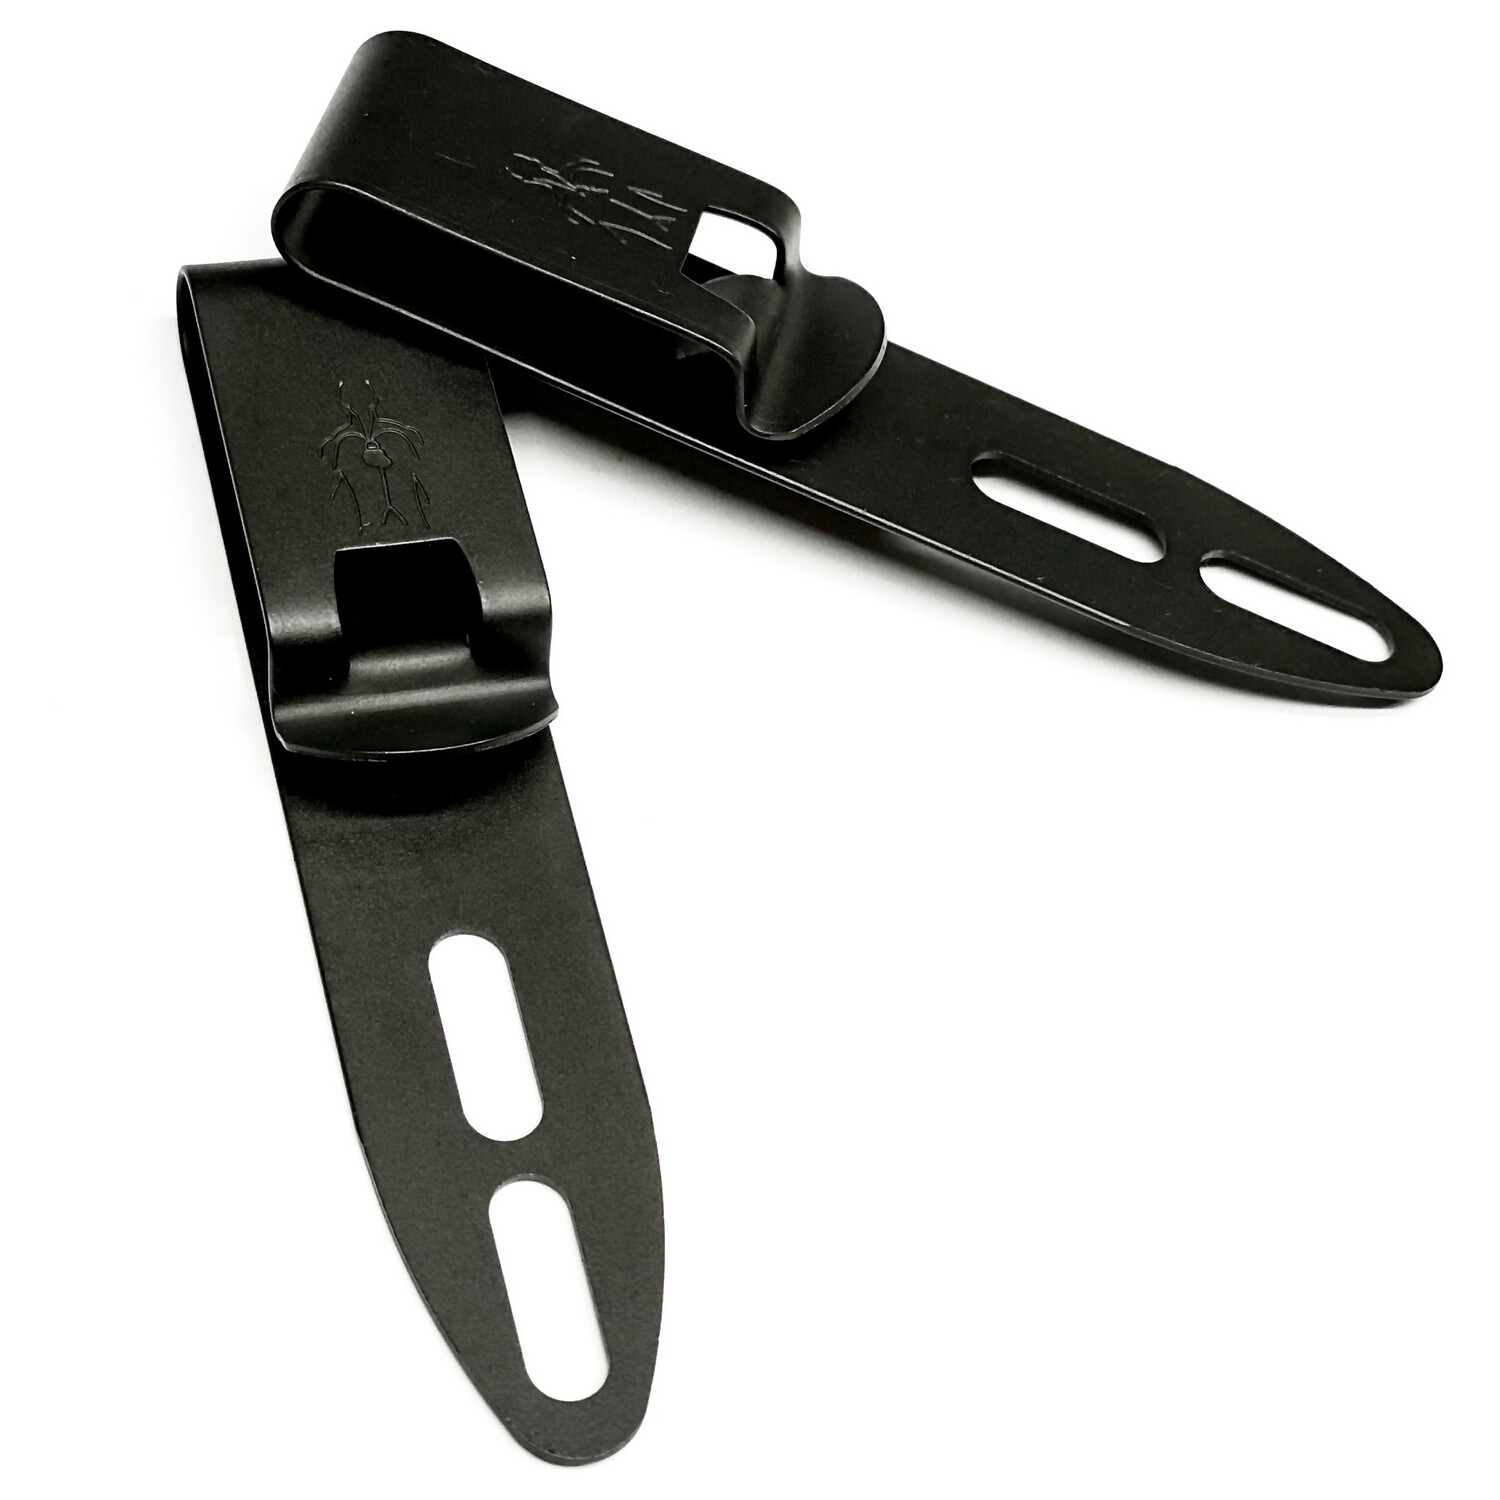 Mod 2.1U - Universal/Height adjustable HLR Discreet Gear Clip™ - Behind the belt **Back In Stock 3/28**